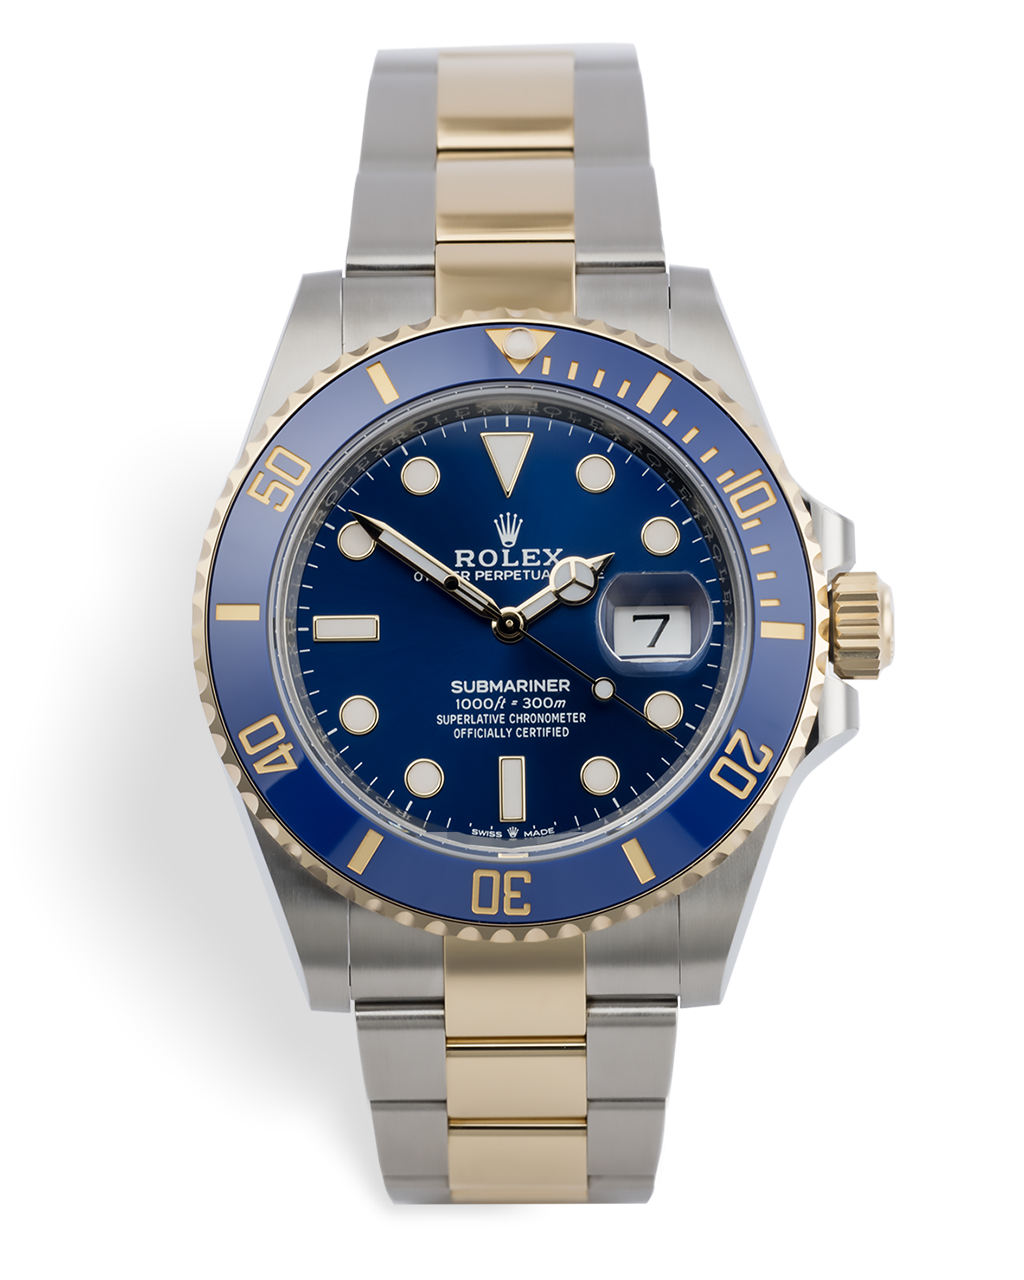 Rolex Submariner Date Watches | ref 126613LB | '2020 New Release' | The ...